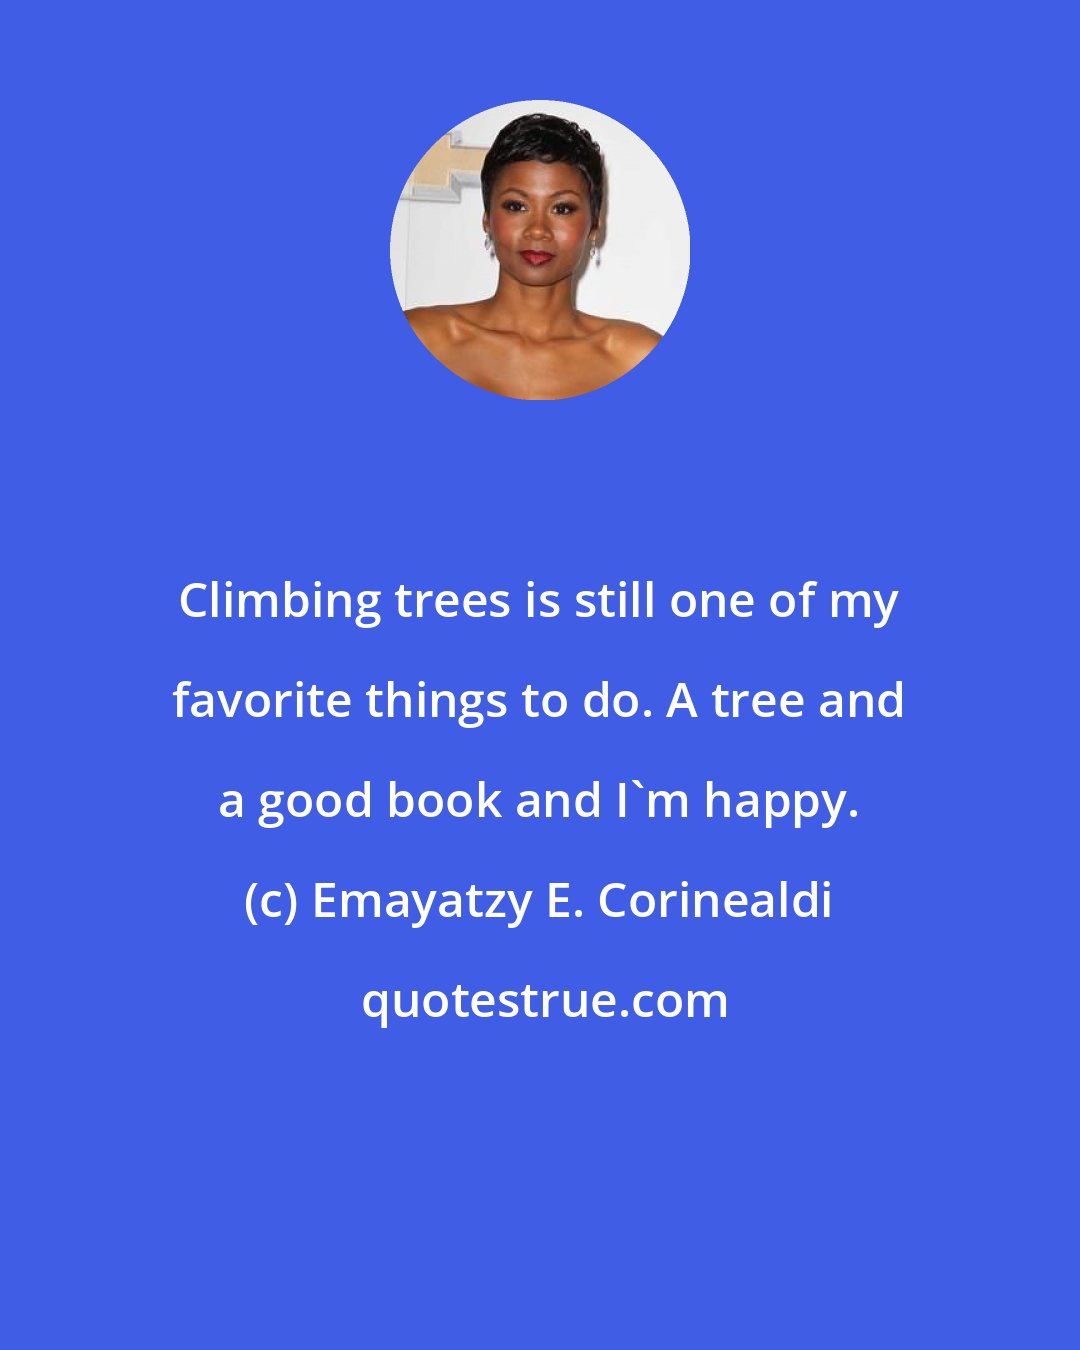 Emayatzy E. Corinealdi: Climbing trees is still one of my favorite things to do. A tree and a good book and I'm happy.